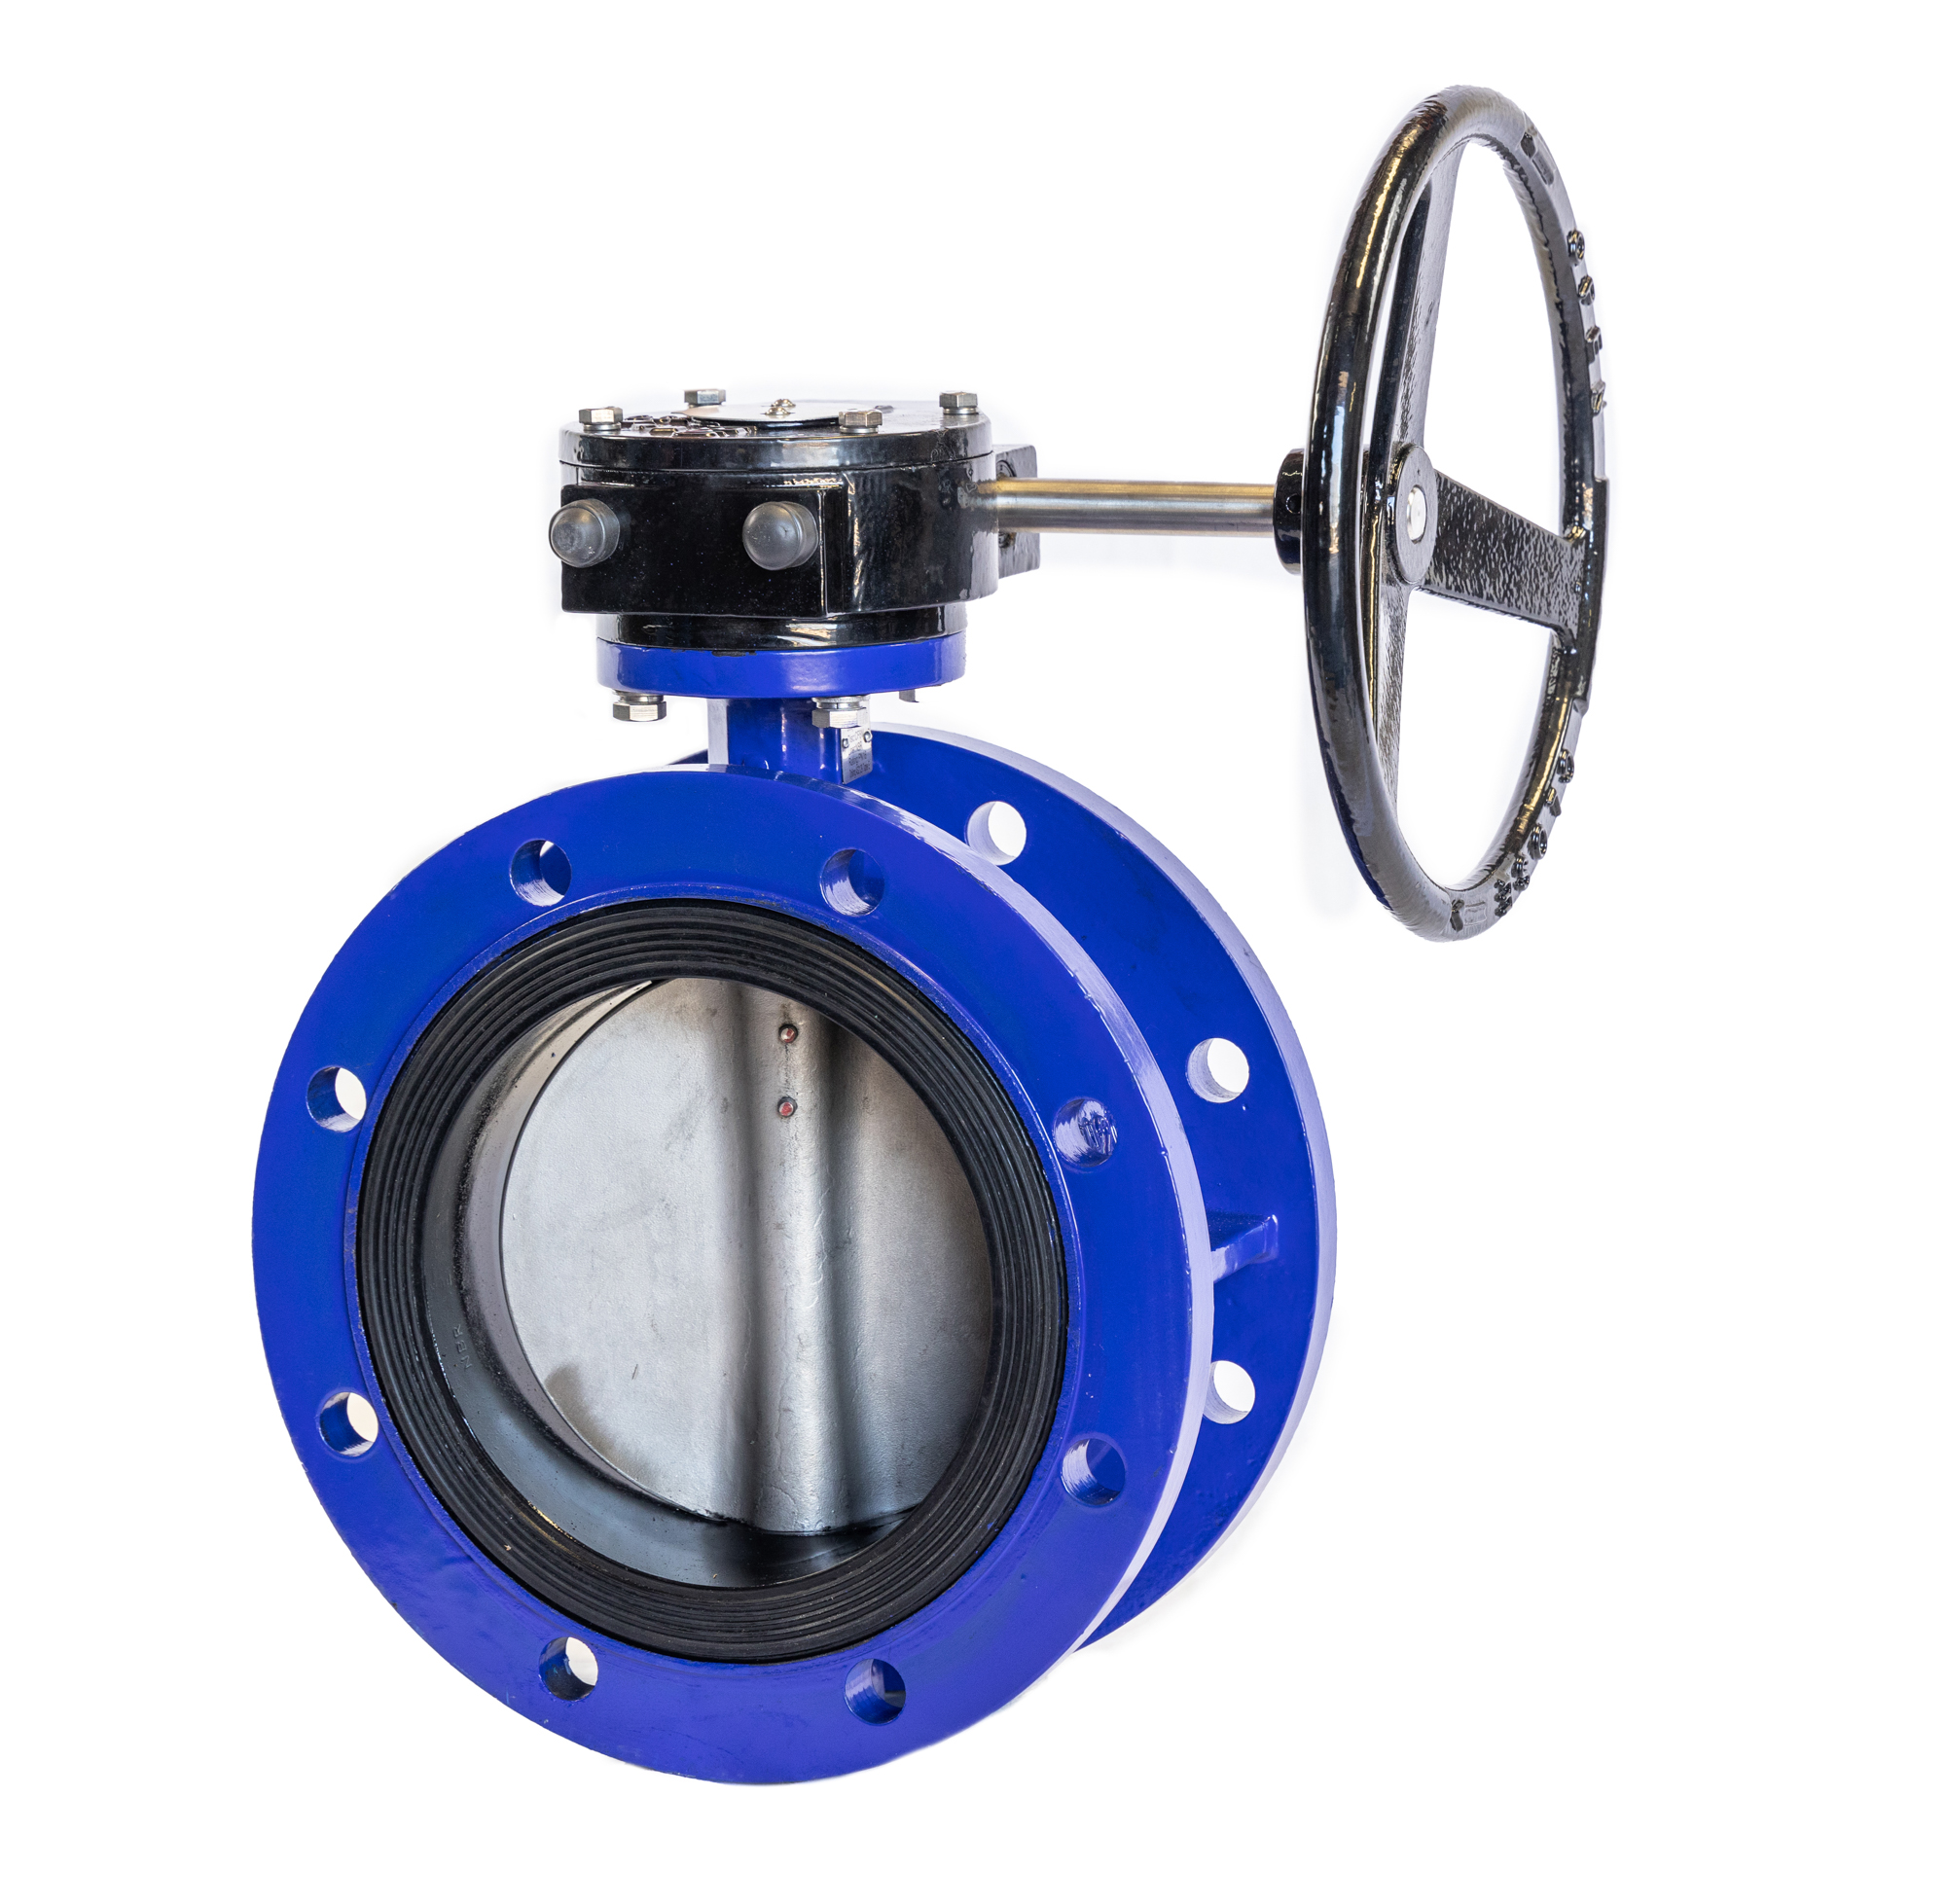 An image of a flanged butterfly valve with a gear handle.